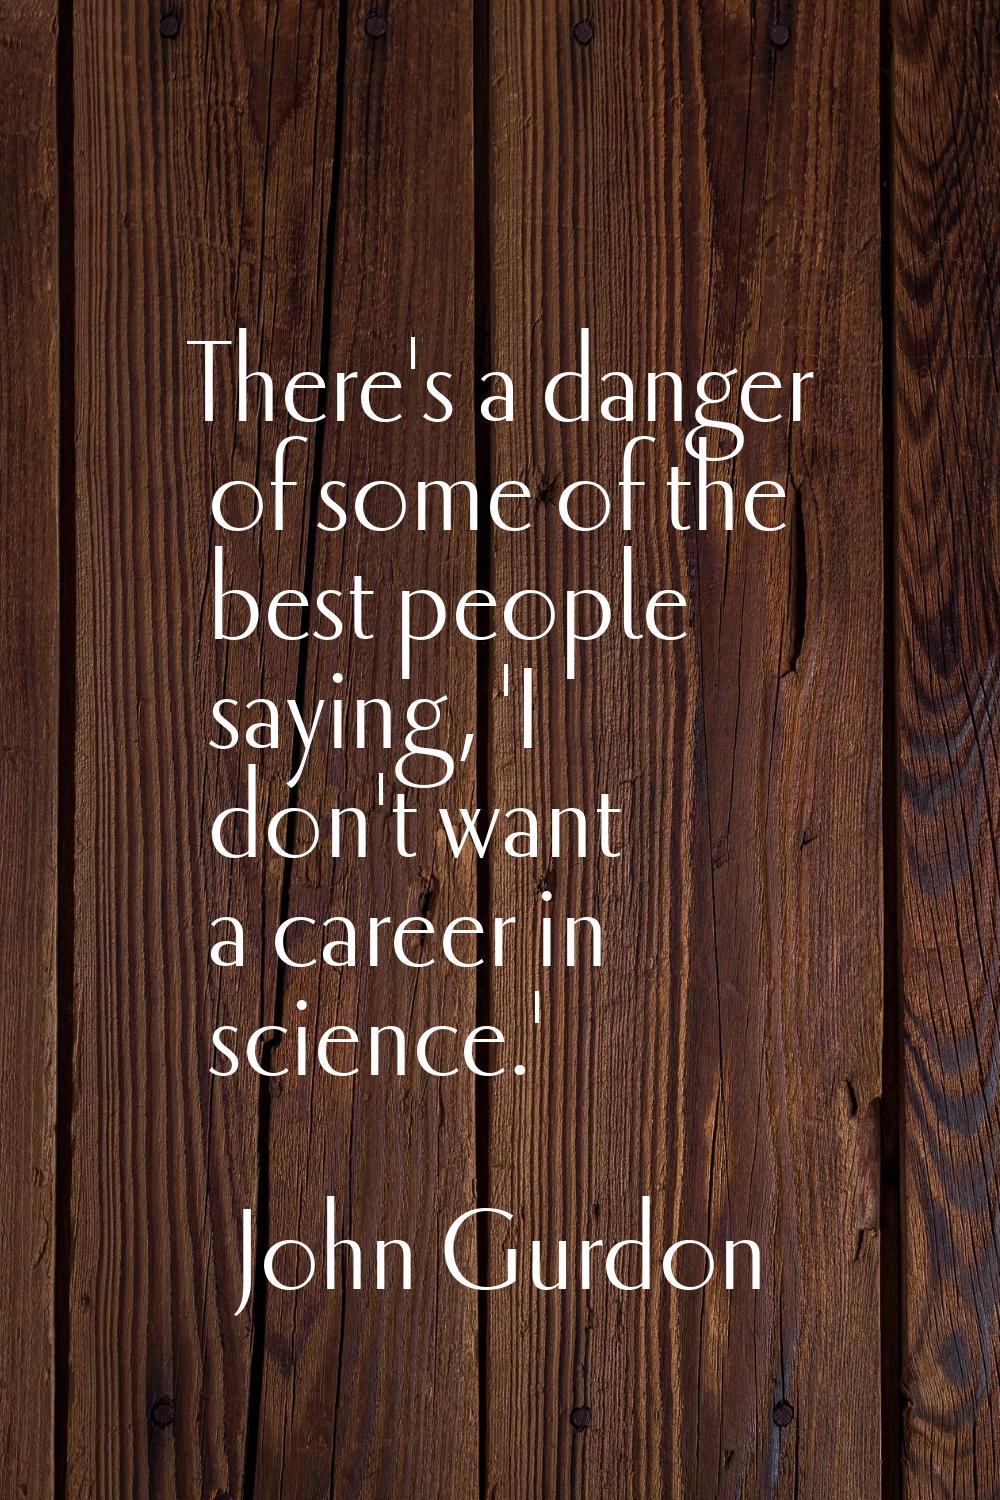 There's a danger of some of the best people saying, 'I don't want a career in science.'